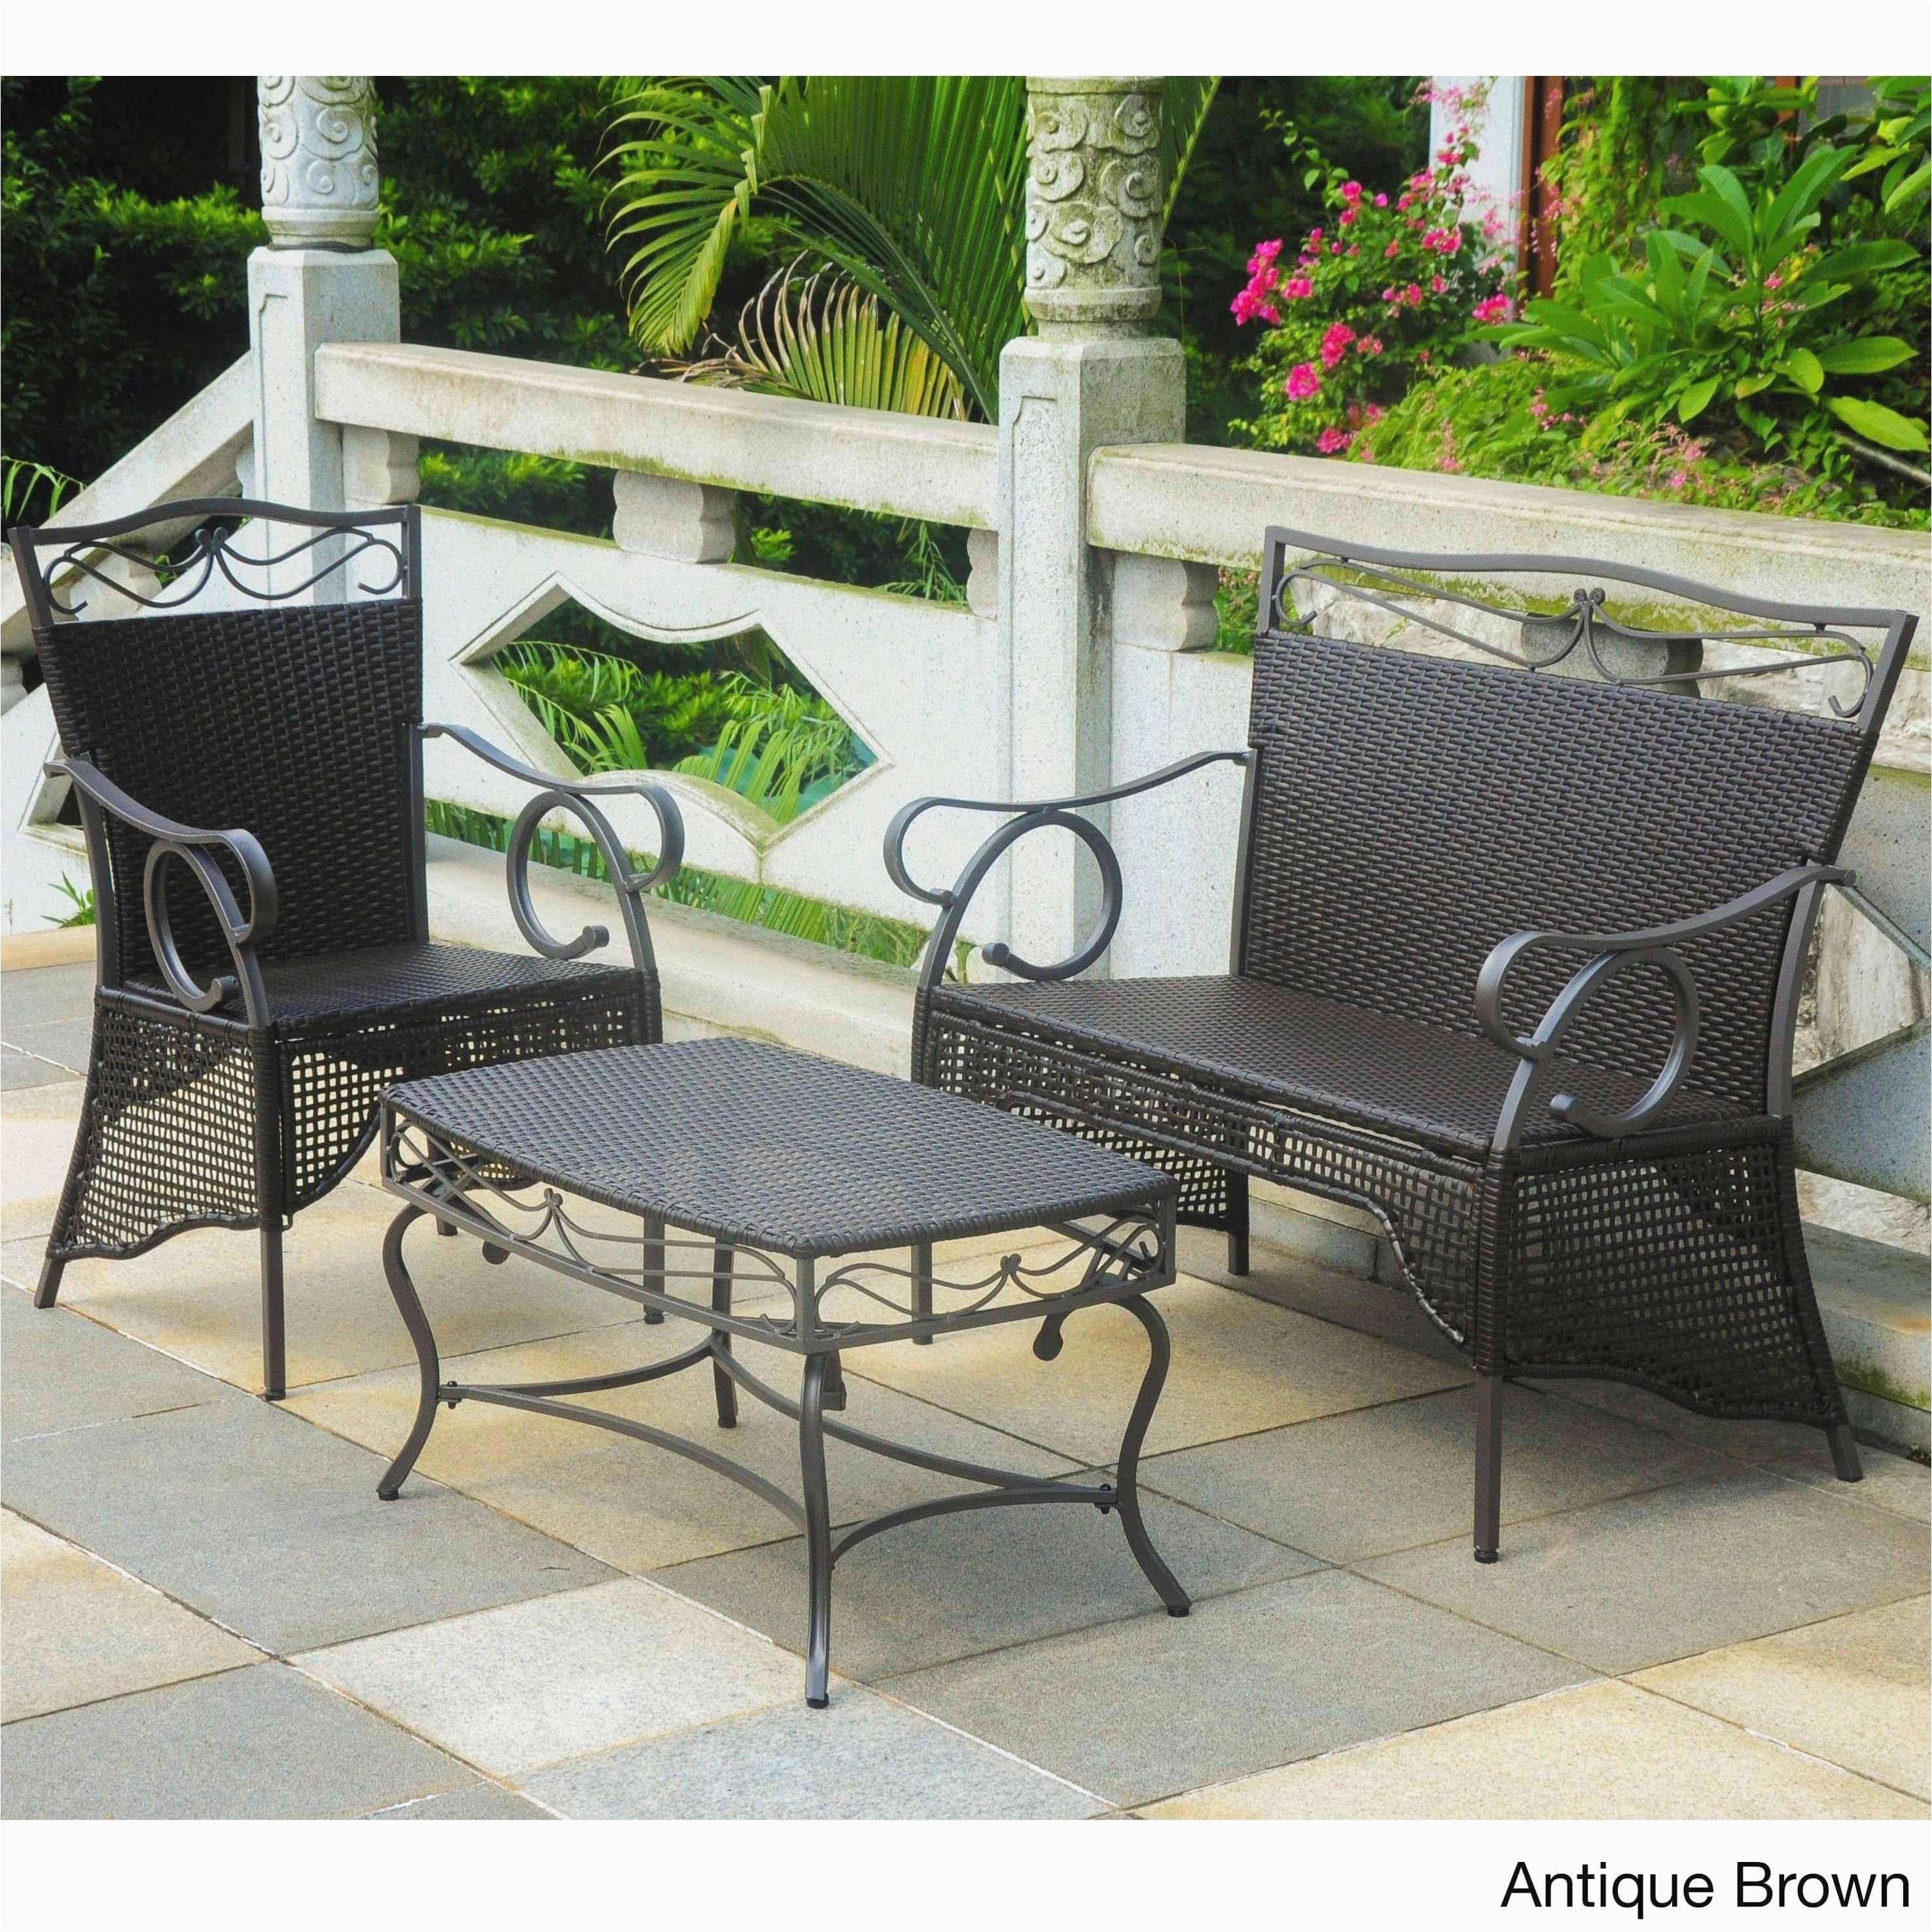 fabulous patio chairs at lowes premium patio furniture at lowes luxury 15 luxury martha stewart patio